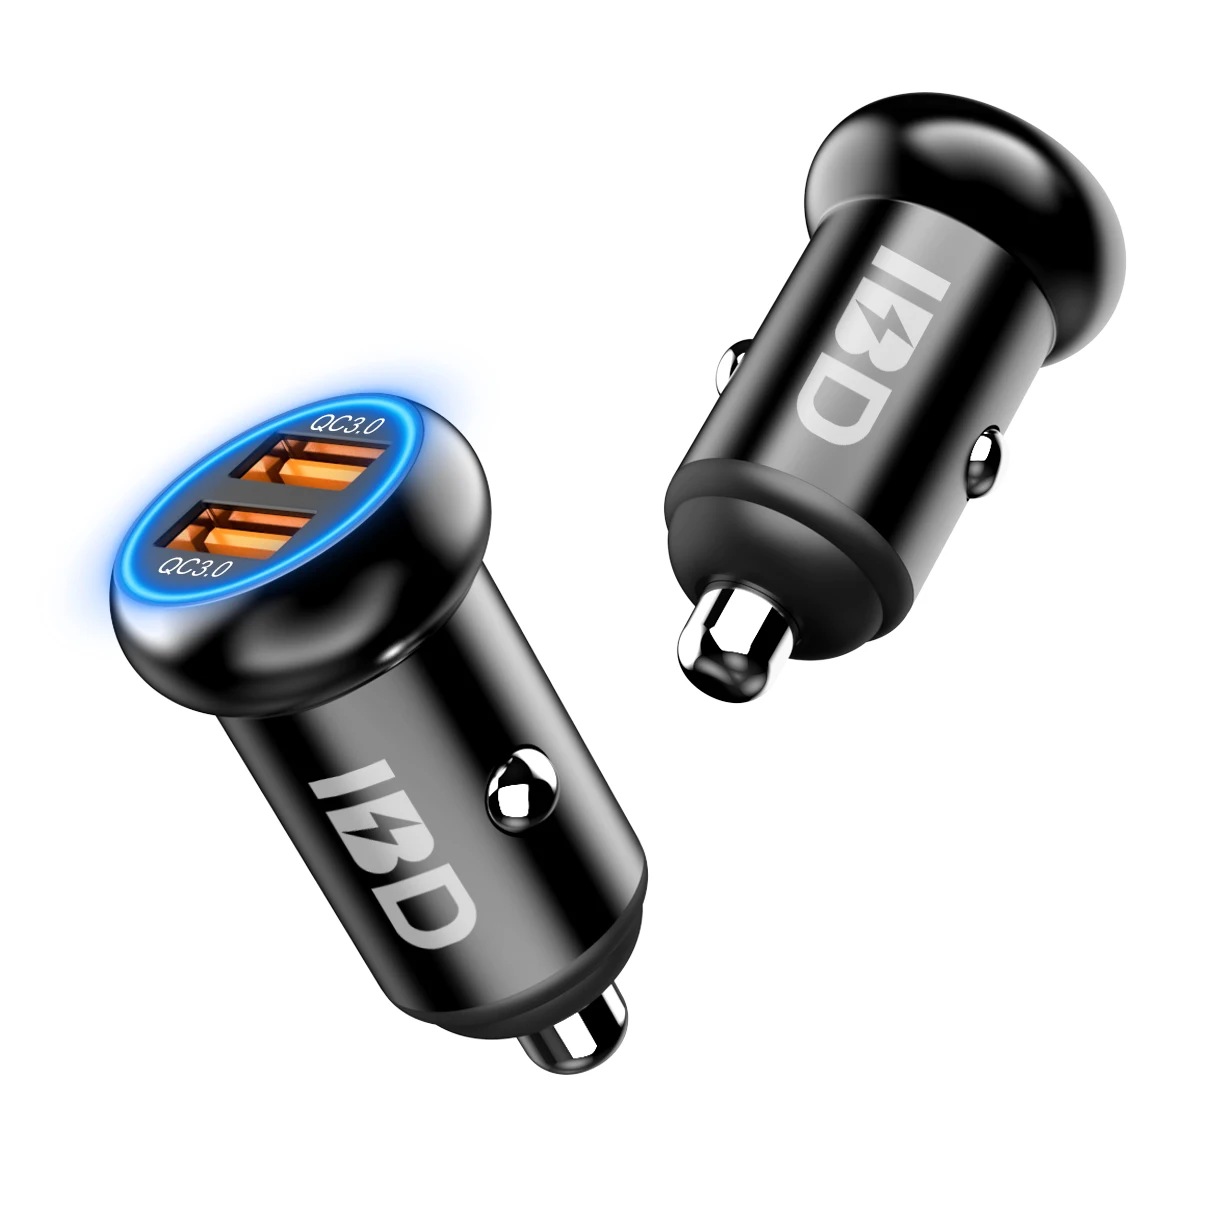 

IBD Dual Usb Car Charger Qc3.0 Fast Charge Car Charger 36w Electric Mini Usb Car Charger, Black or oem